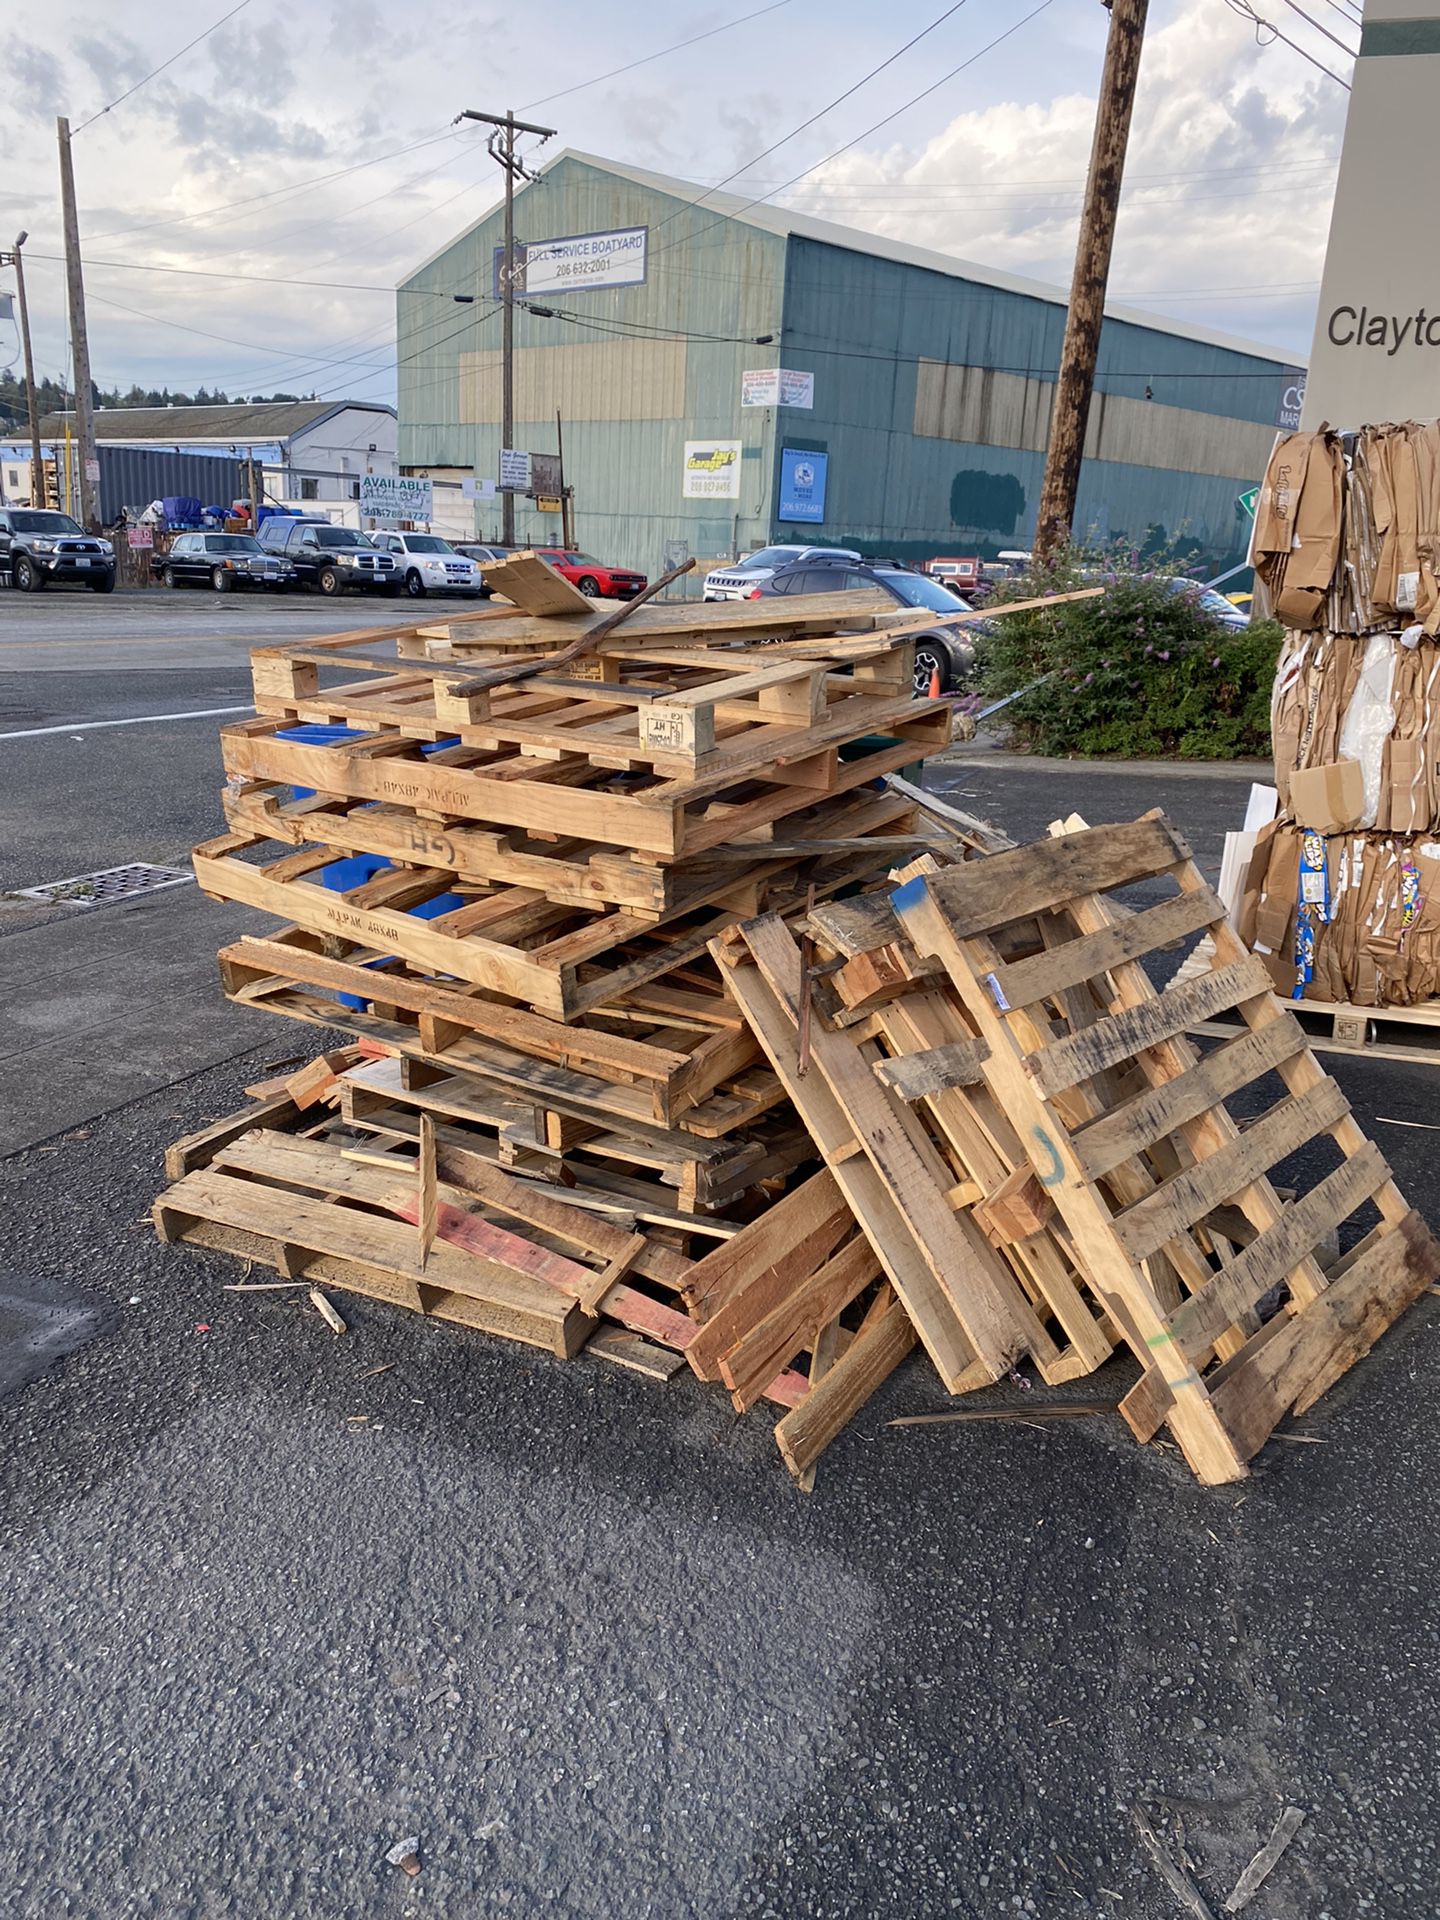 I’ll pay $72.00 if you pick up 100% of these ~15 scrap pallets by 11am today